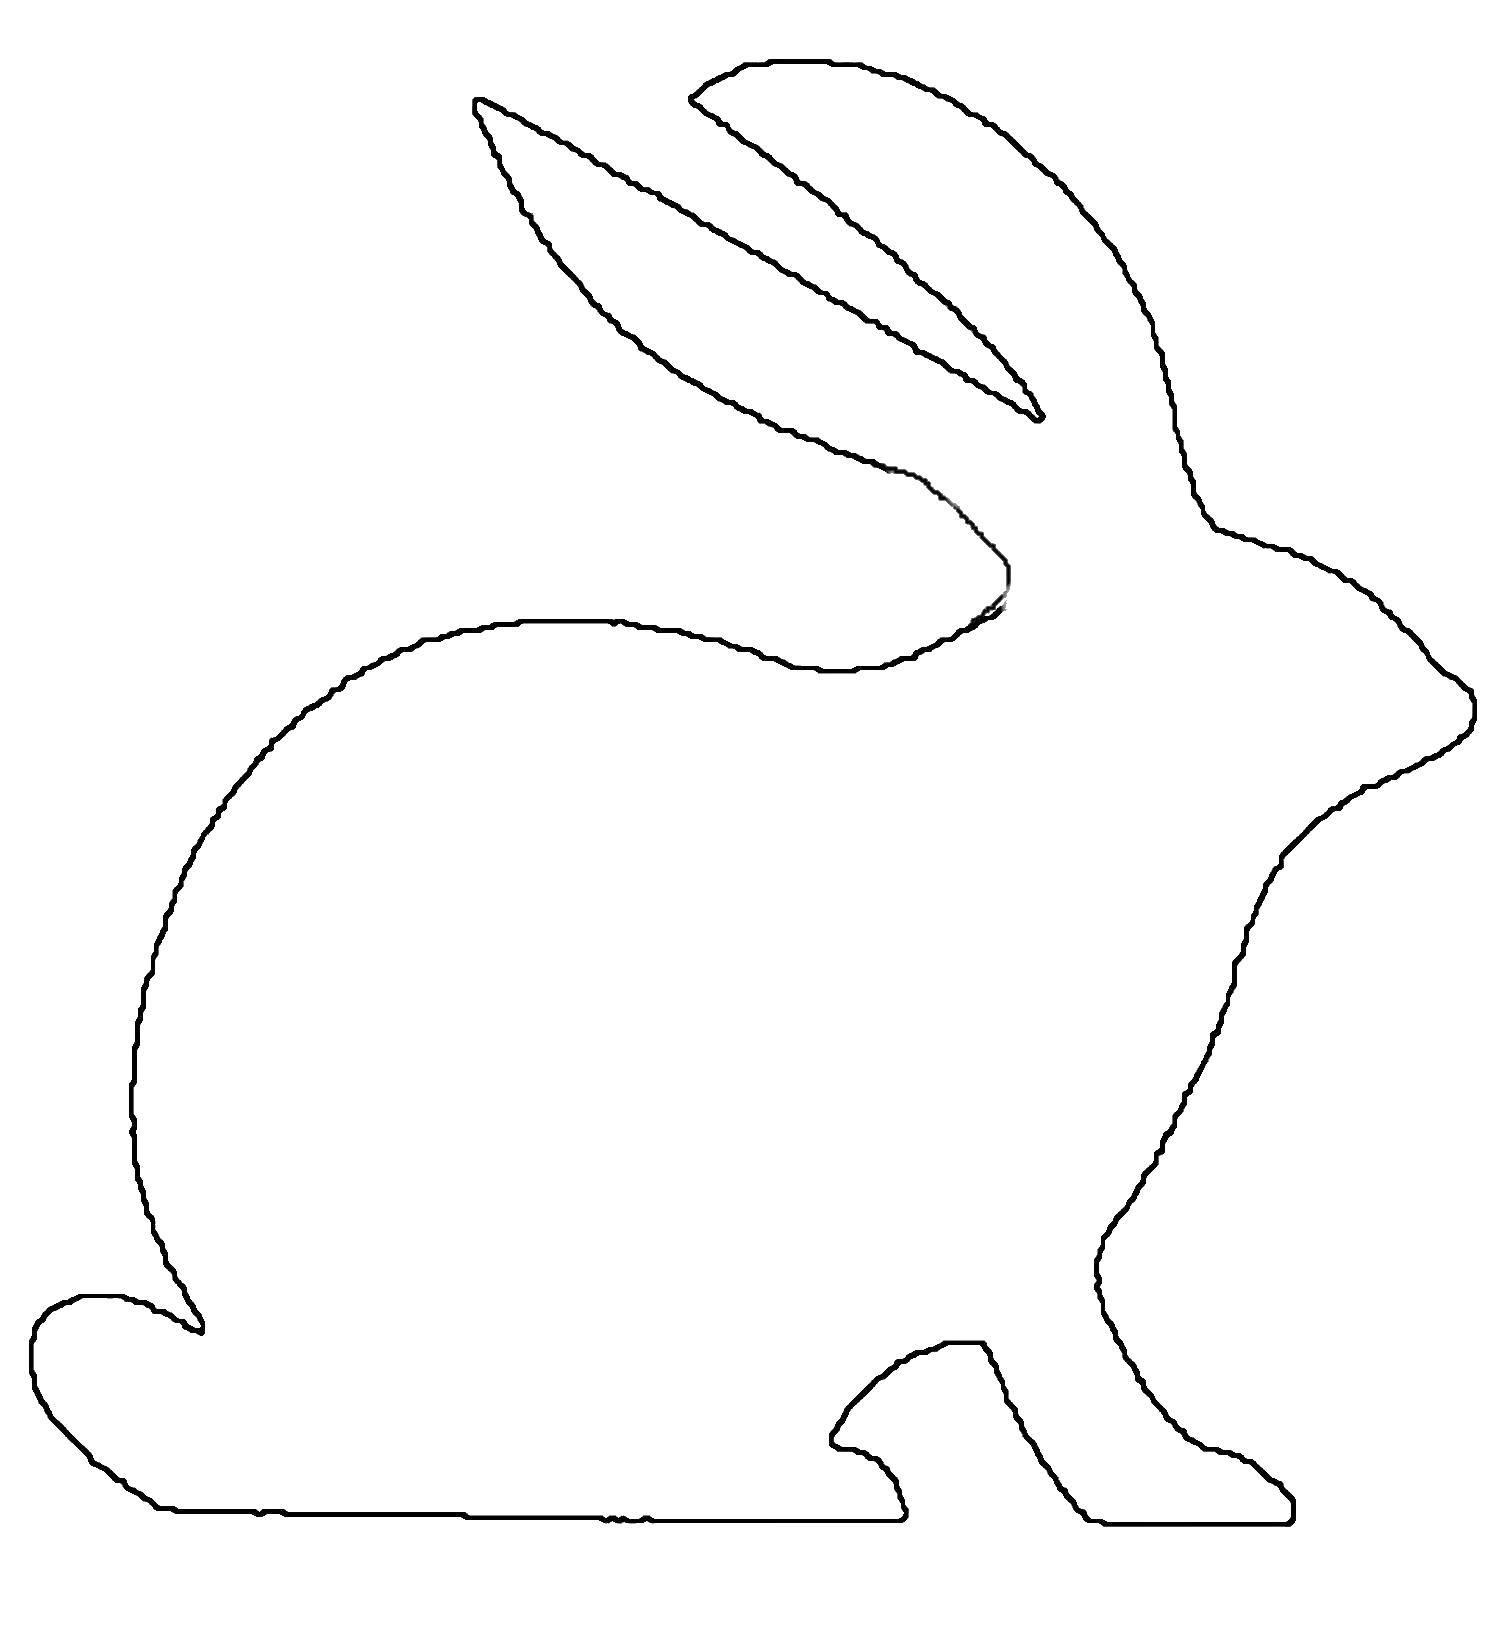 Coloring Hare contours. Category The contour of the hare to cut. Tags:  outline, Pets, rabbit.